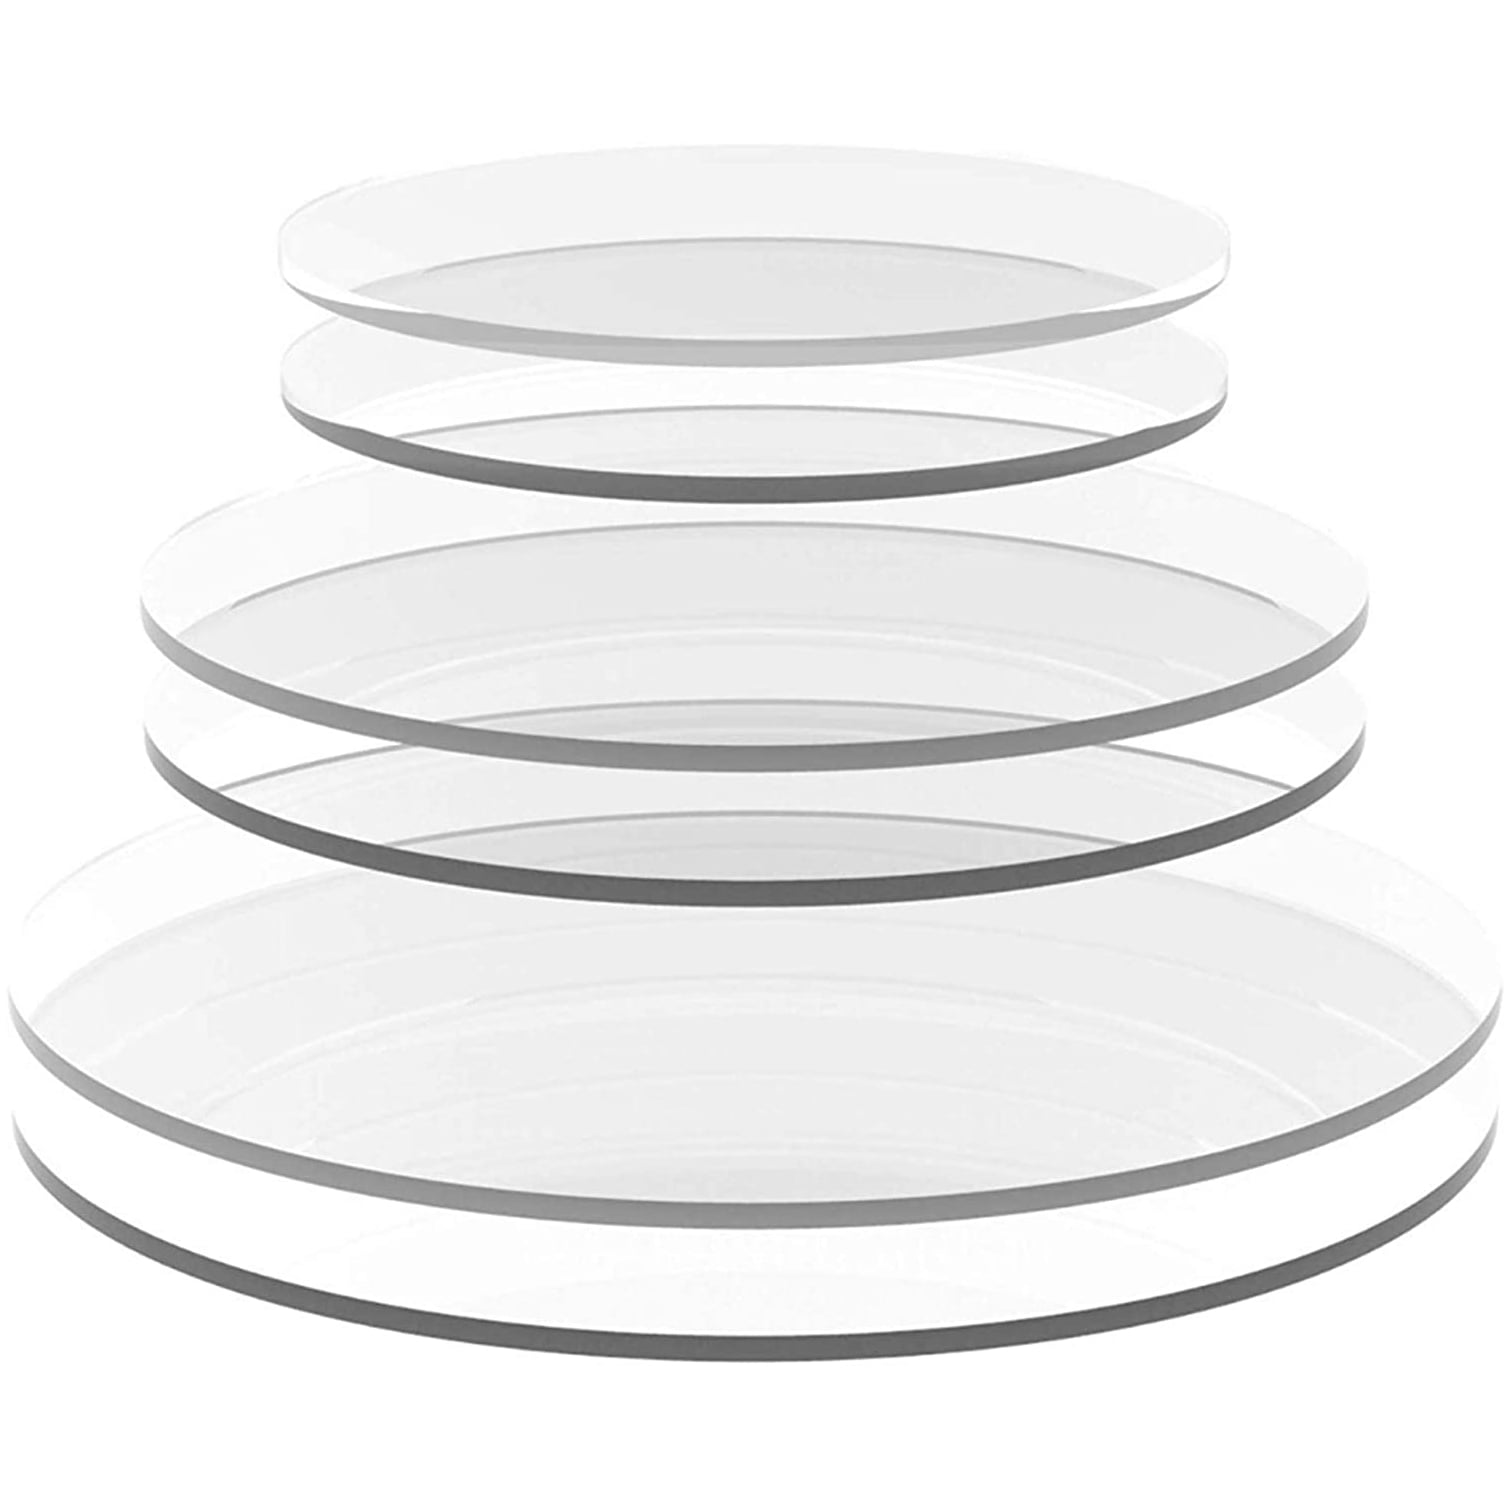 Details about   10pcs Acrylic Sheet Circle Round Disc,Clear,1/8 x 1/2inch 